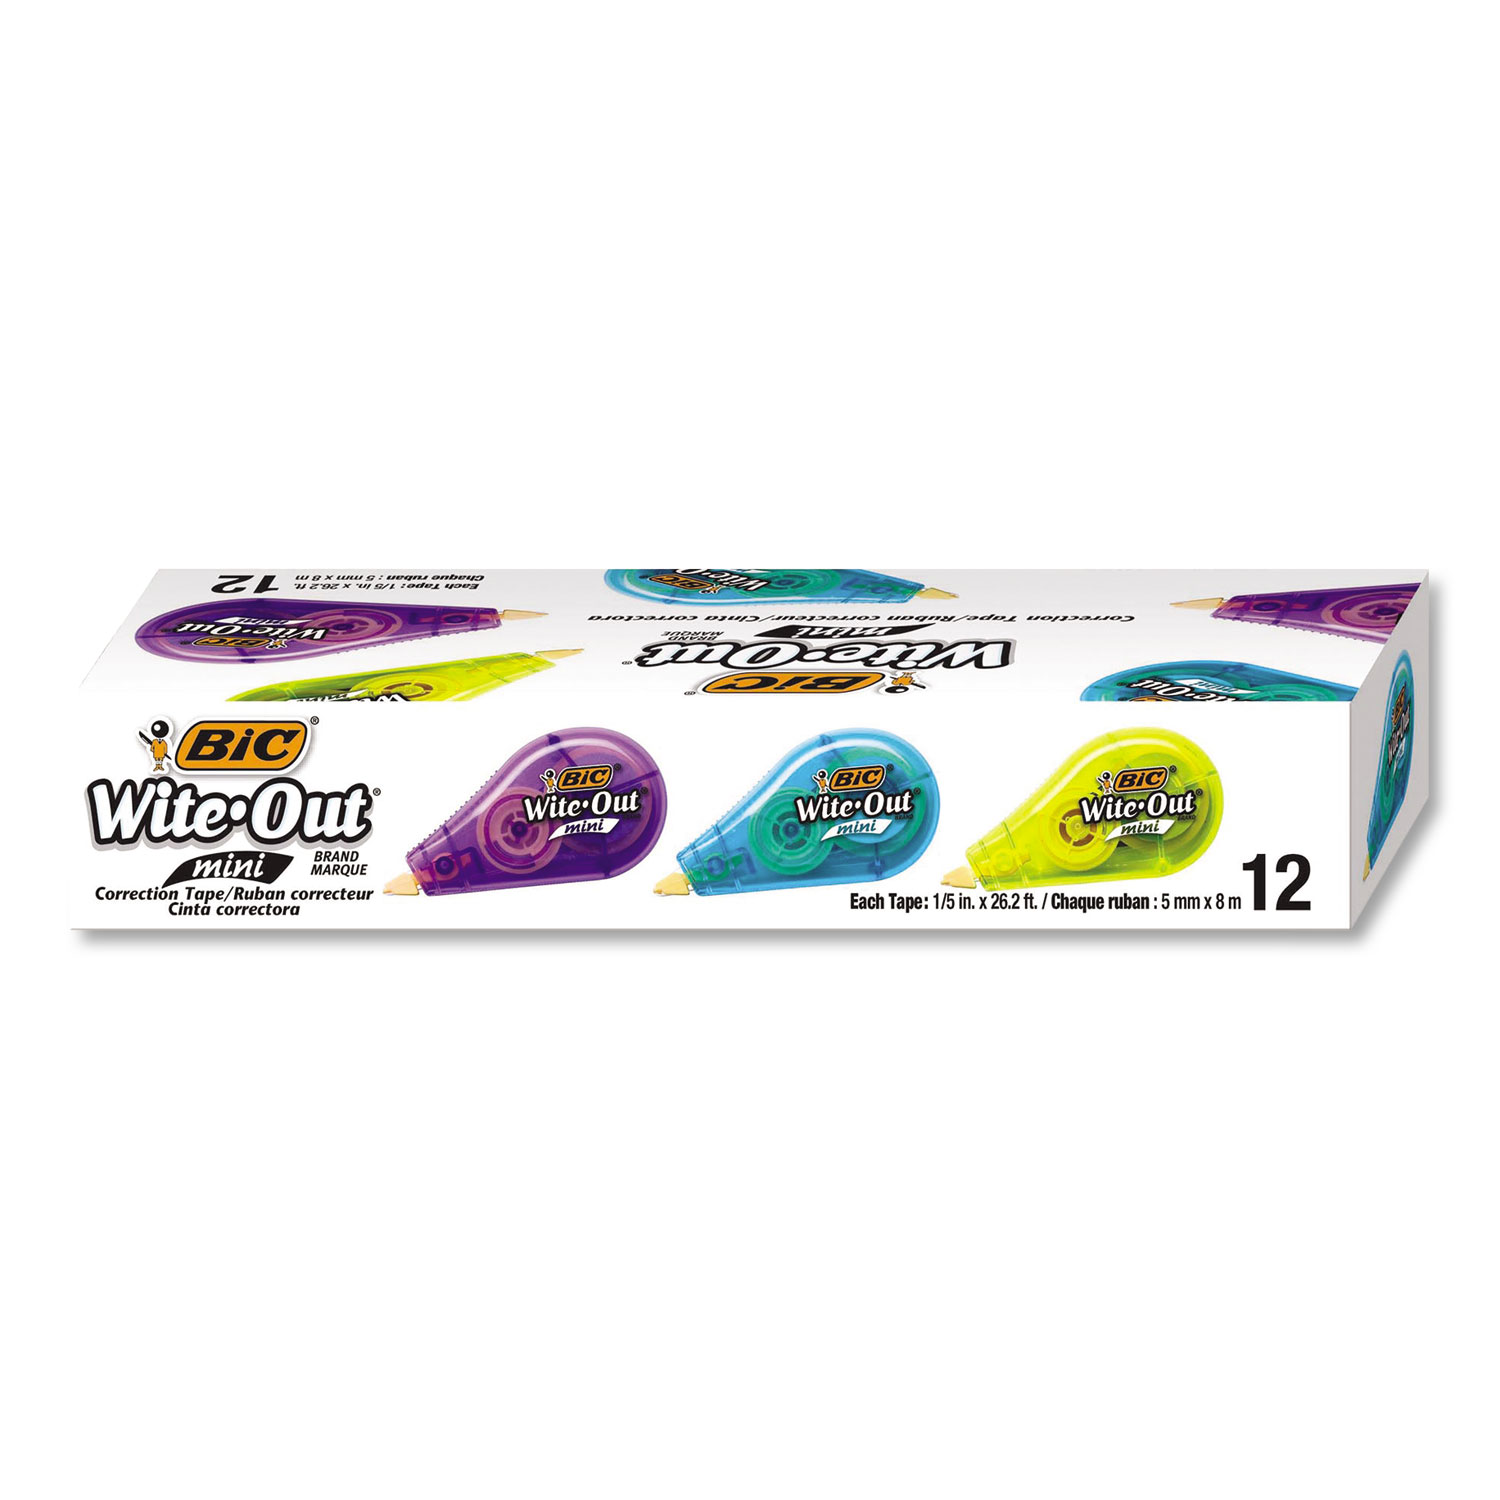 Wite-Out Brand Mini Correction Tape, Non-Refillable, 1/2 w x 26.2 ft, Assorted